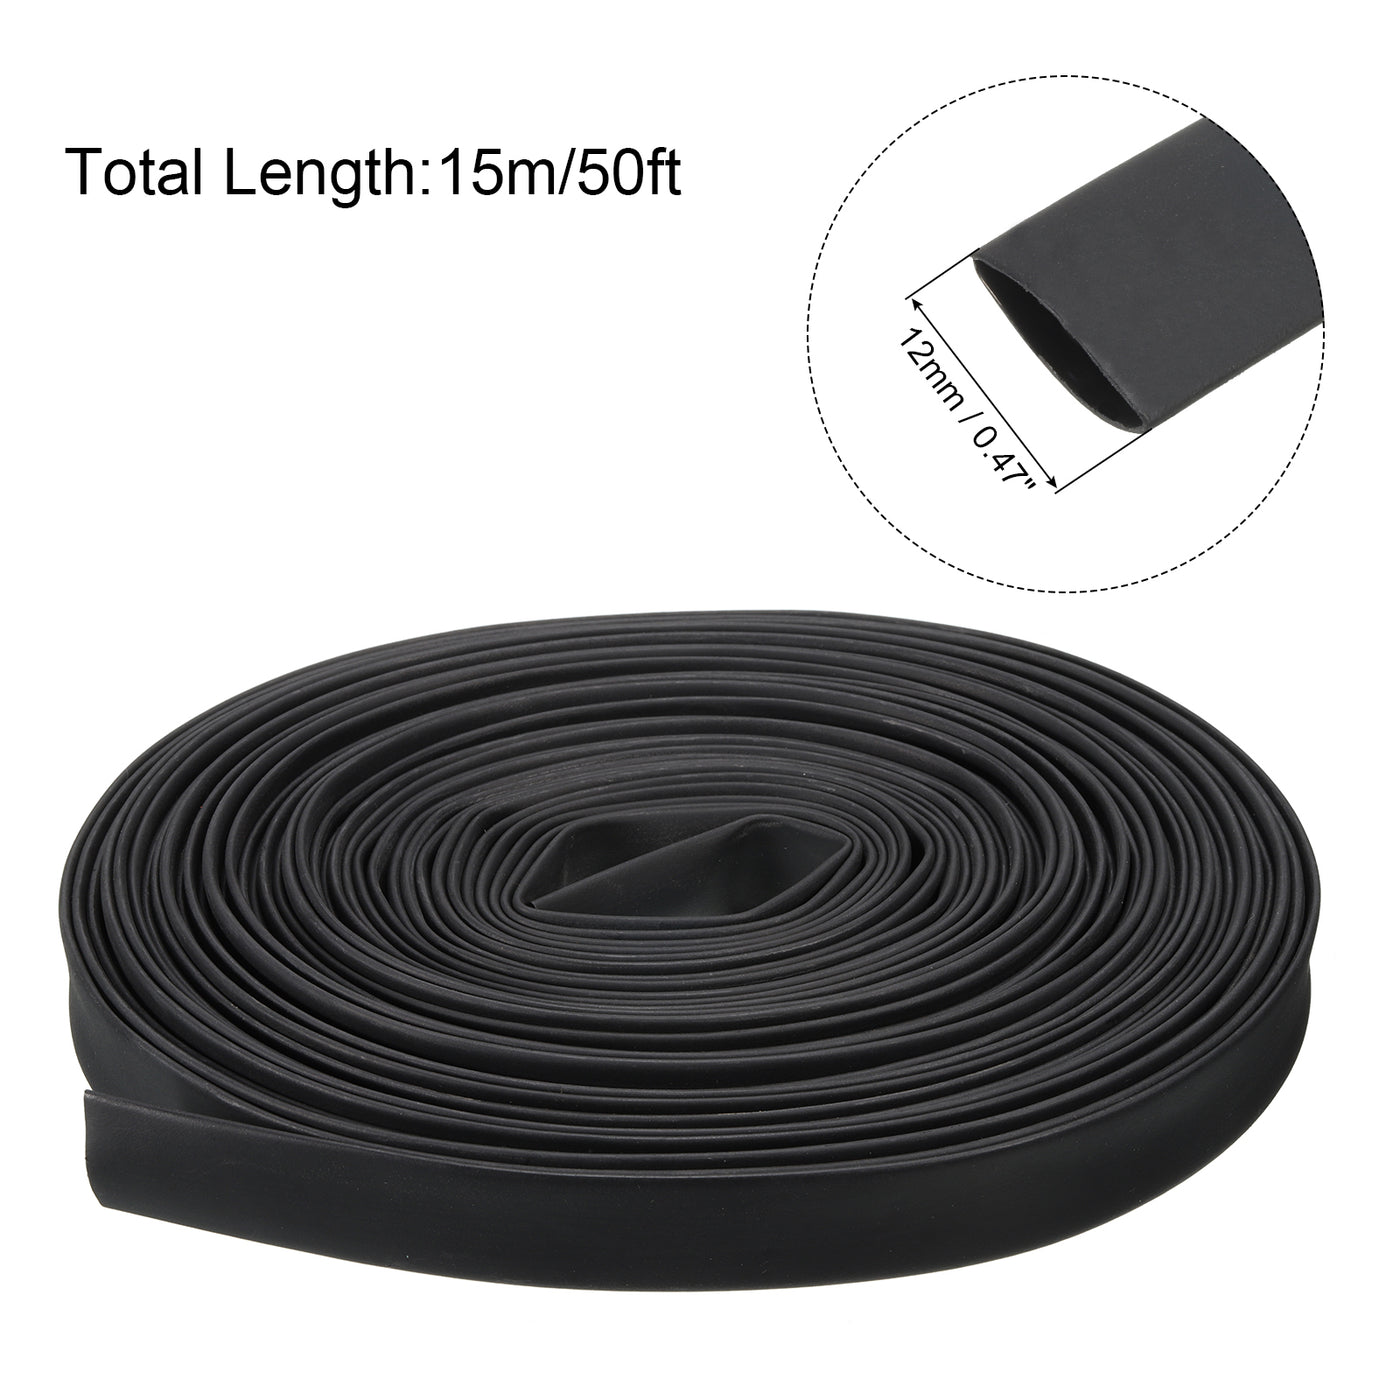 Harfington 2pcs 1/2"(12mm) Dia 50ft Heat Shrink Tubing 4:1 Dual Wall Adhesive Lined Marine Waterproof Shrink Tube for Industrial Electrical Cable Wire Wrap